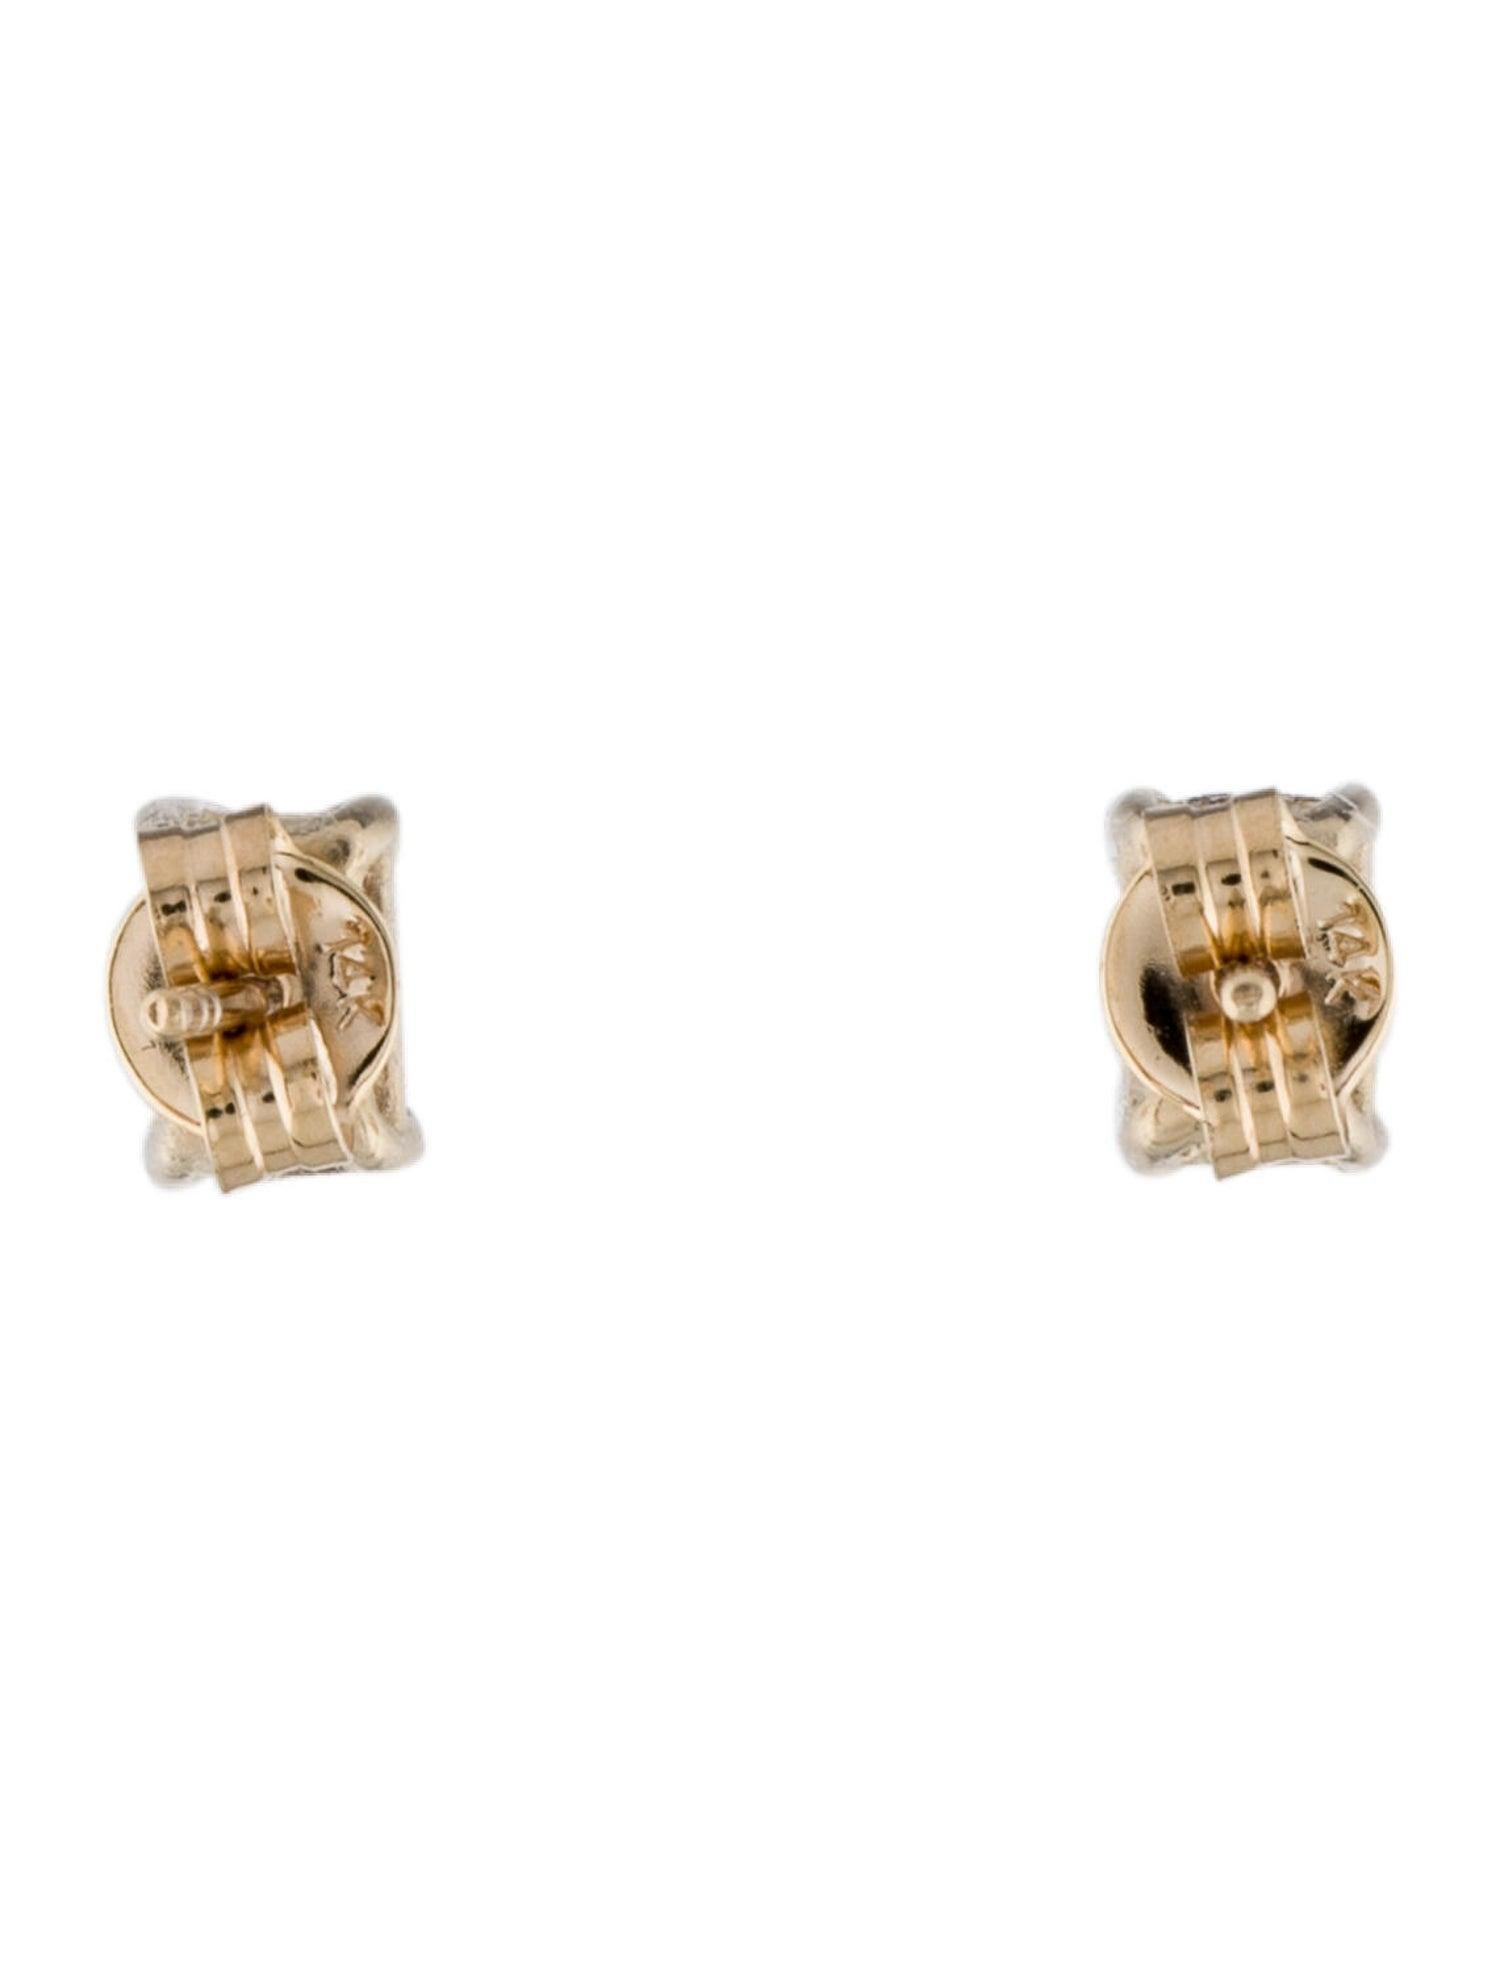 14K Yellow Gold Tourmaline Stud Earrings - Emerald Cut Pink Gemstones, Elegant D In New Condition For Sale In Holtsville, NY